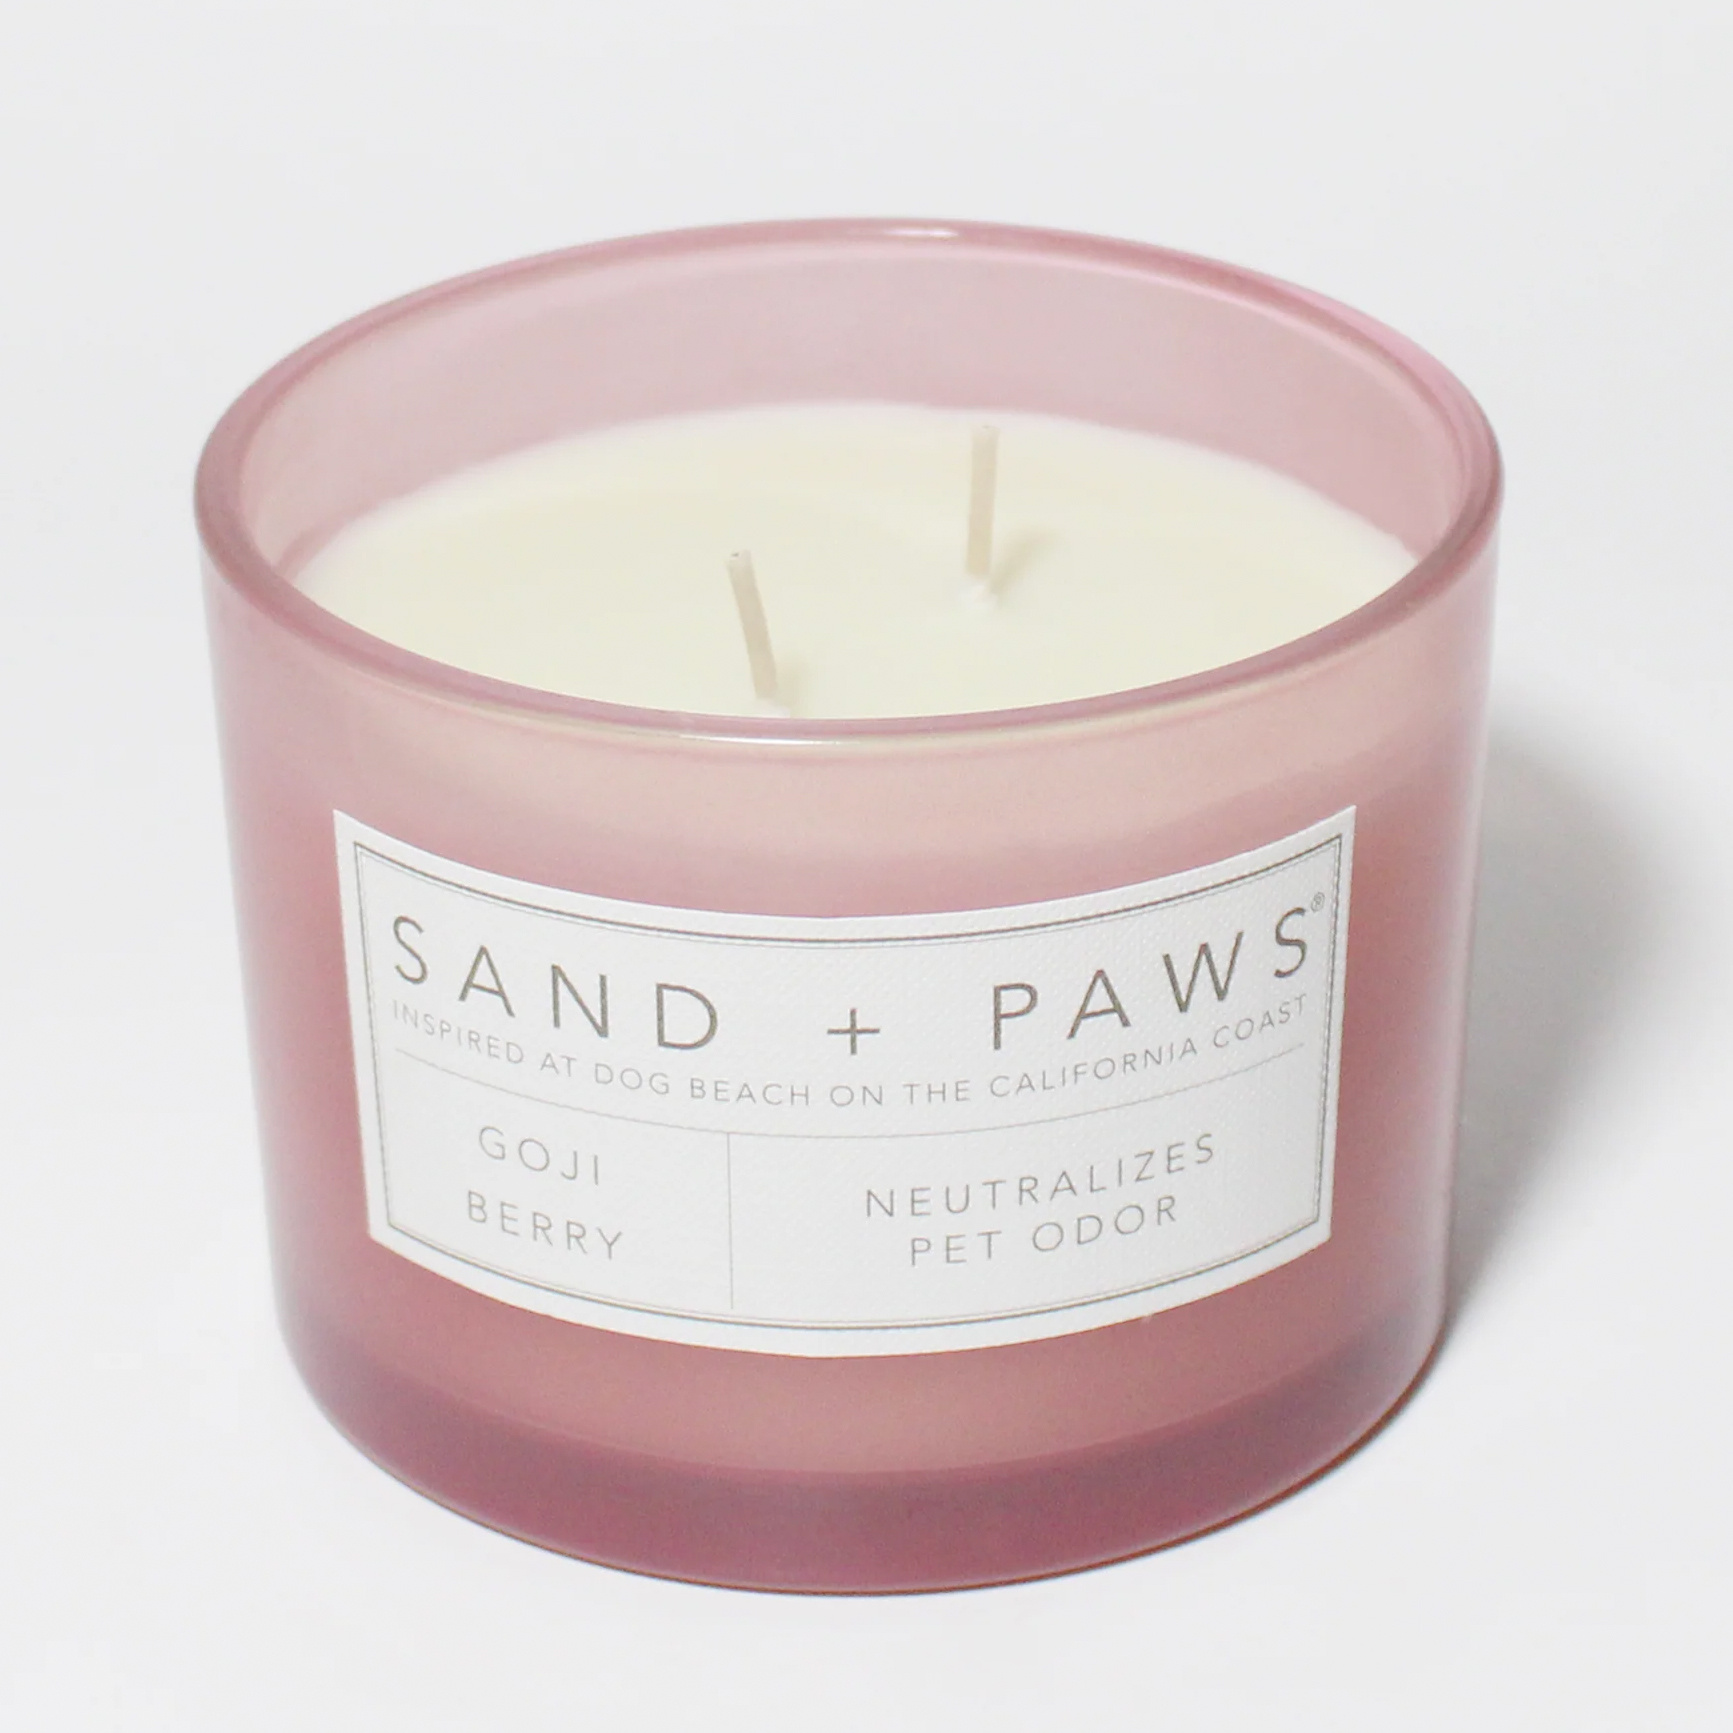 Sand + Paws Sand + Paws Candle